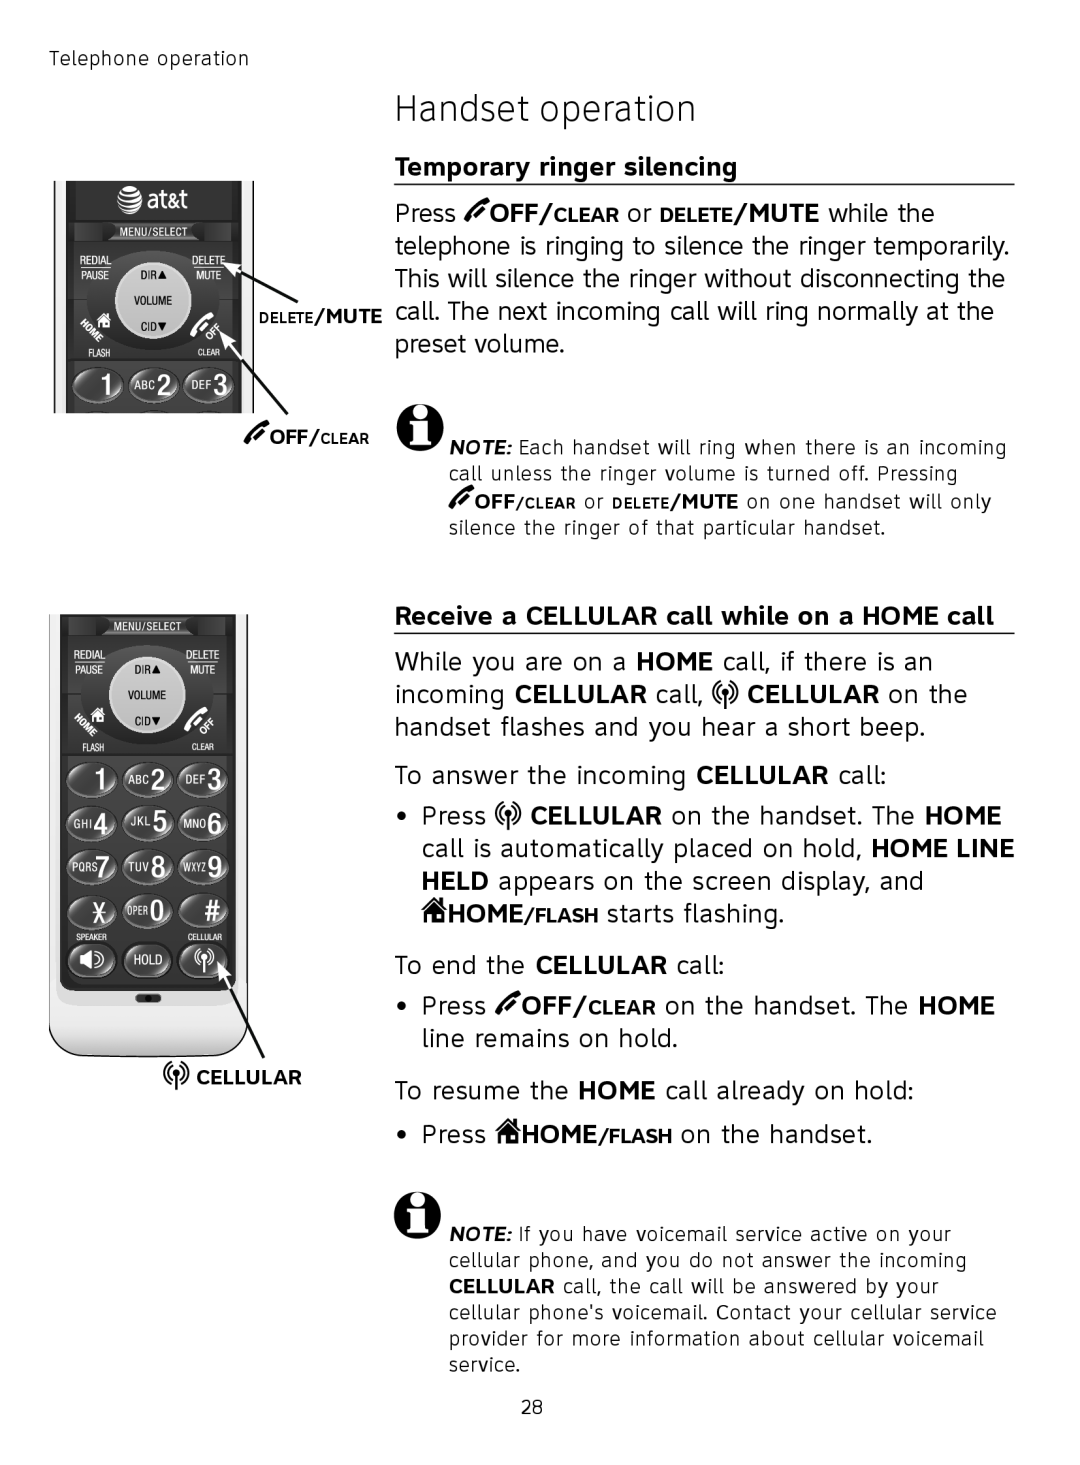 AT&T TL91378, TL9178, TL91178 Temporary ringer silencing, Receive a CELLULAR call while on a HOME call, Handset operation 